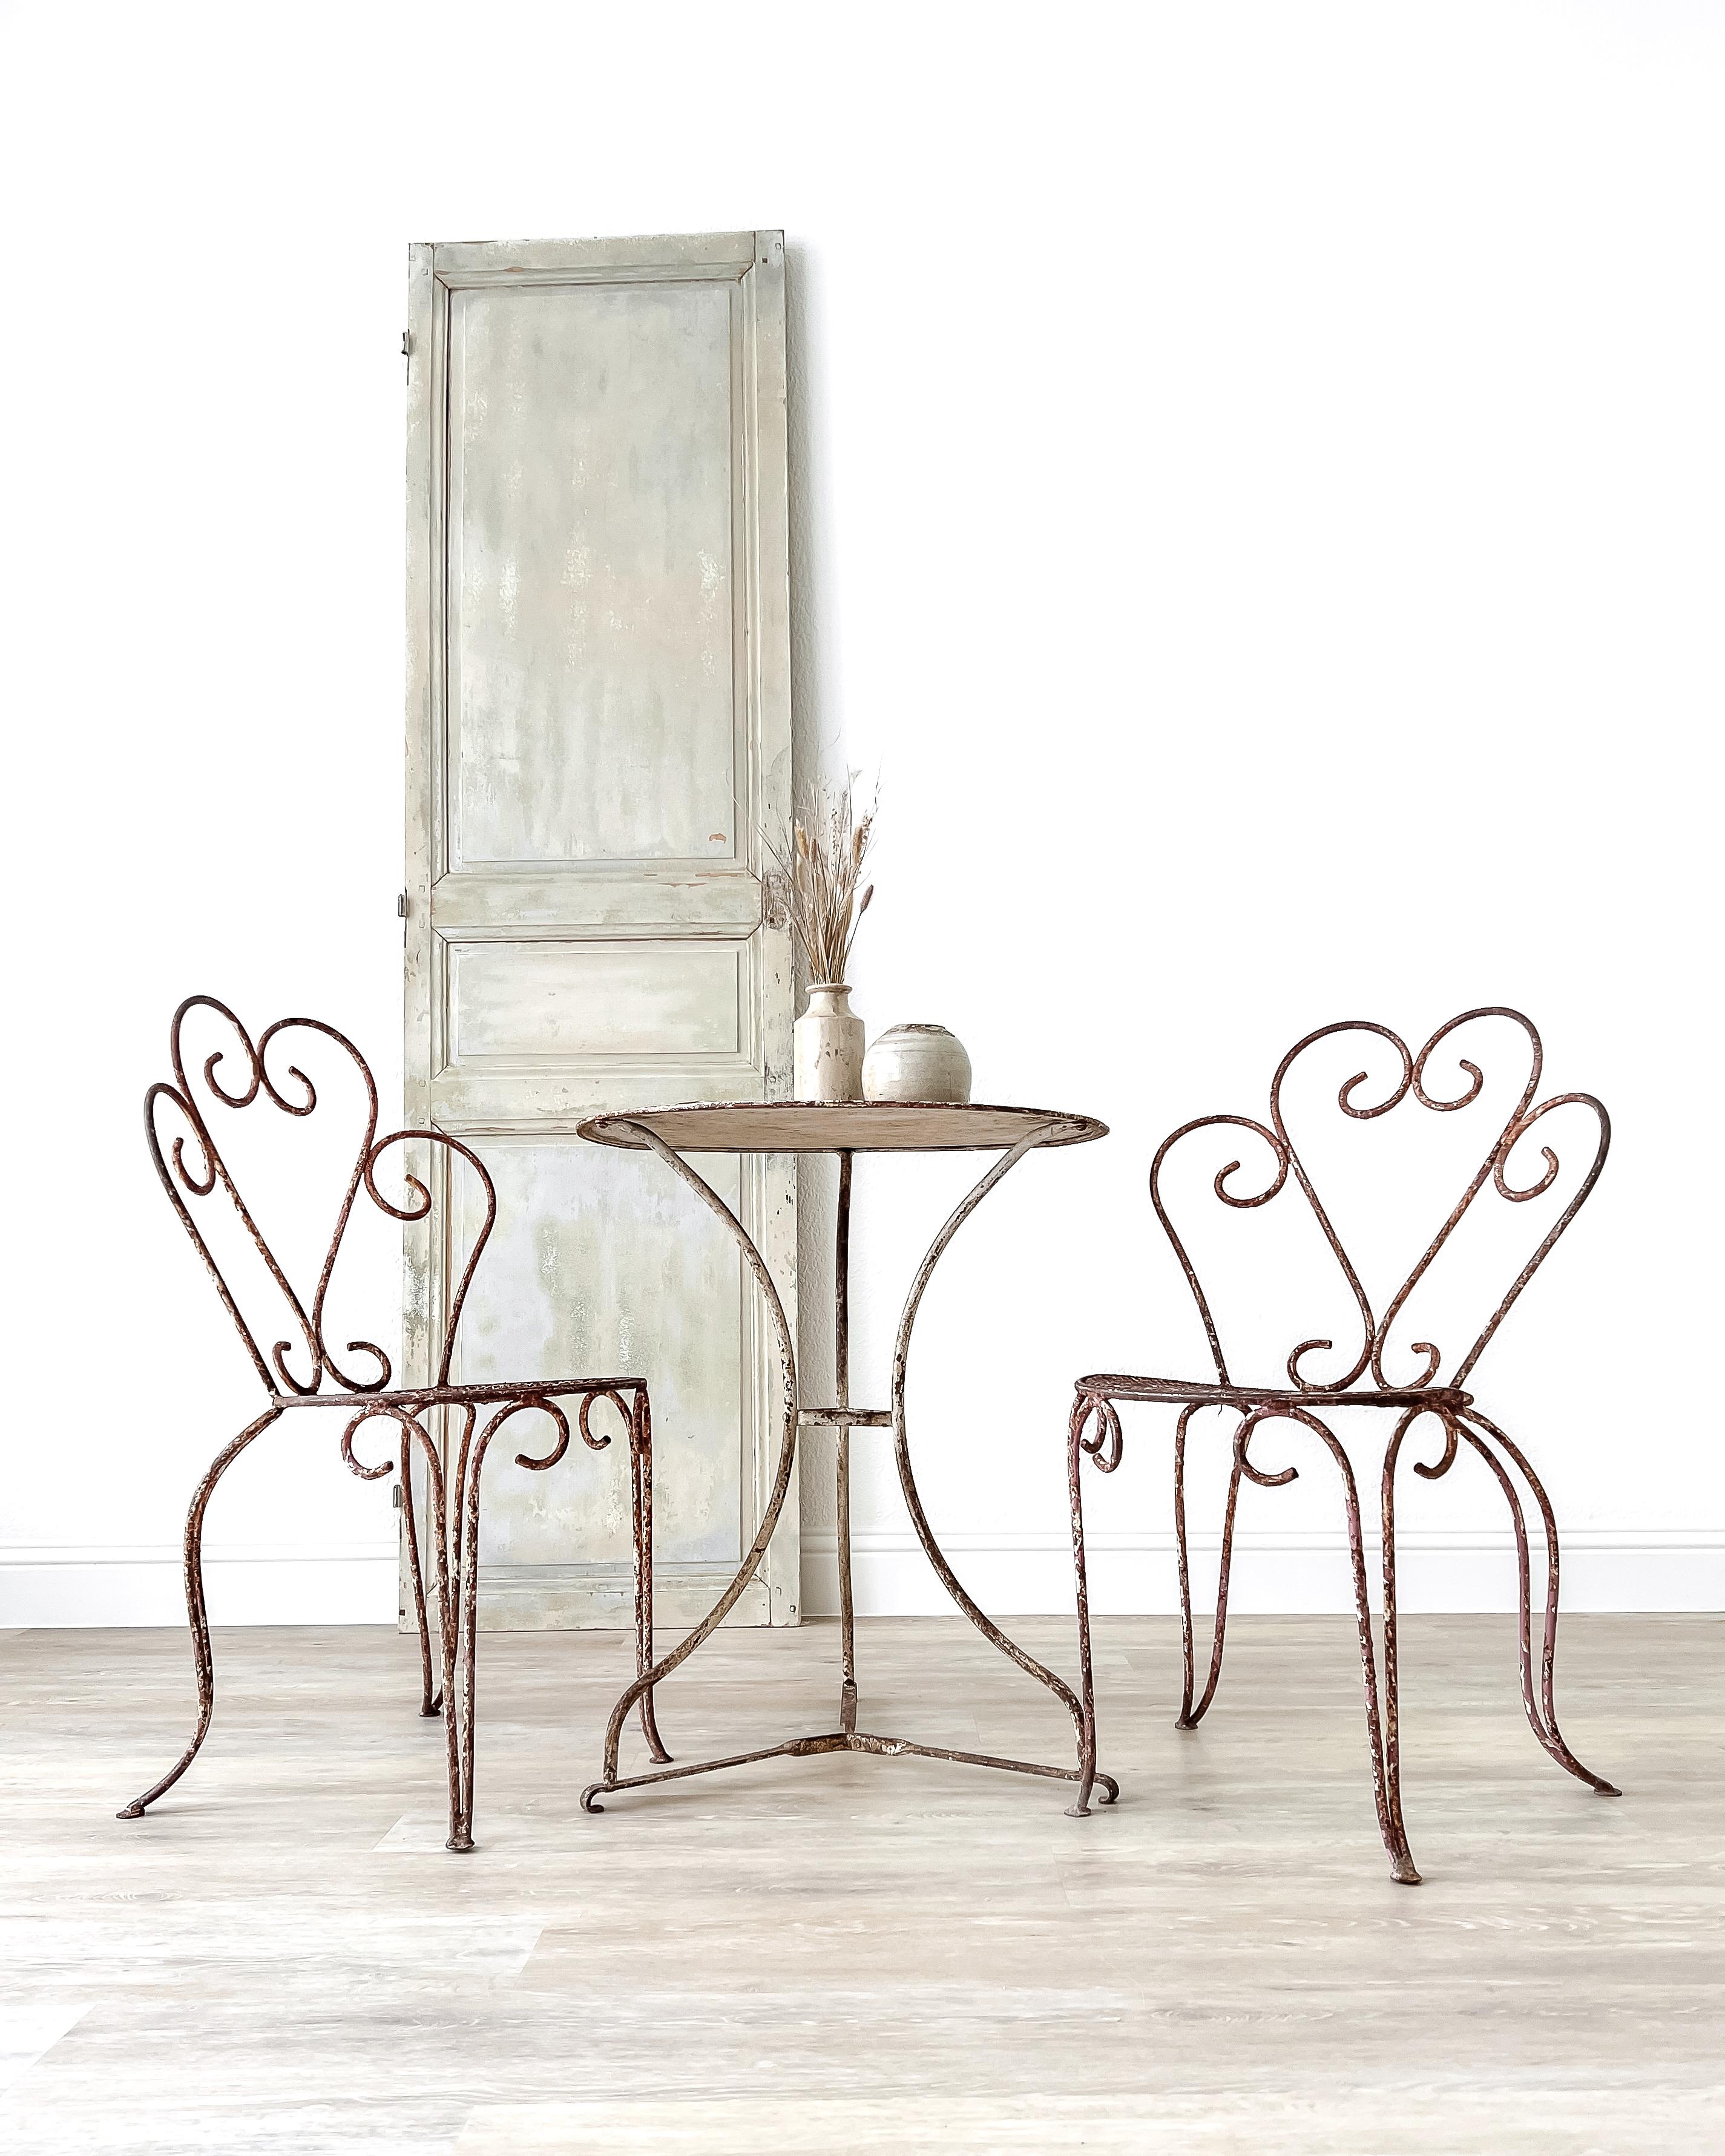 A chic and charming metal garden table with two matching chairs. Worn by the elements and showing myriad chippy paint layers, the set has acquired a wonderful patina full of unrivaled character. Having a simple design, the table is juxtaposed with a